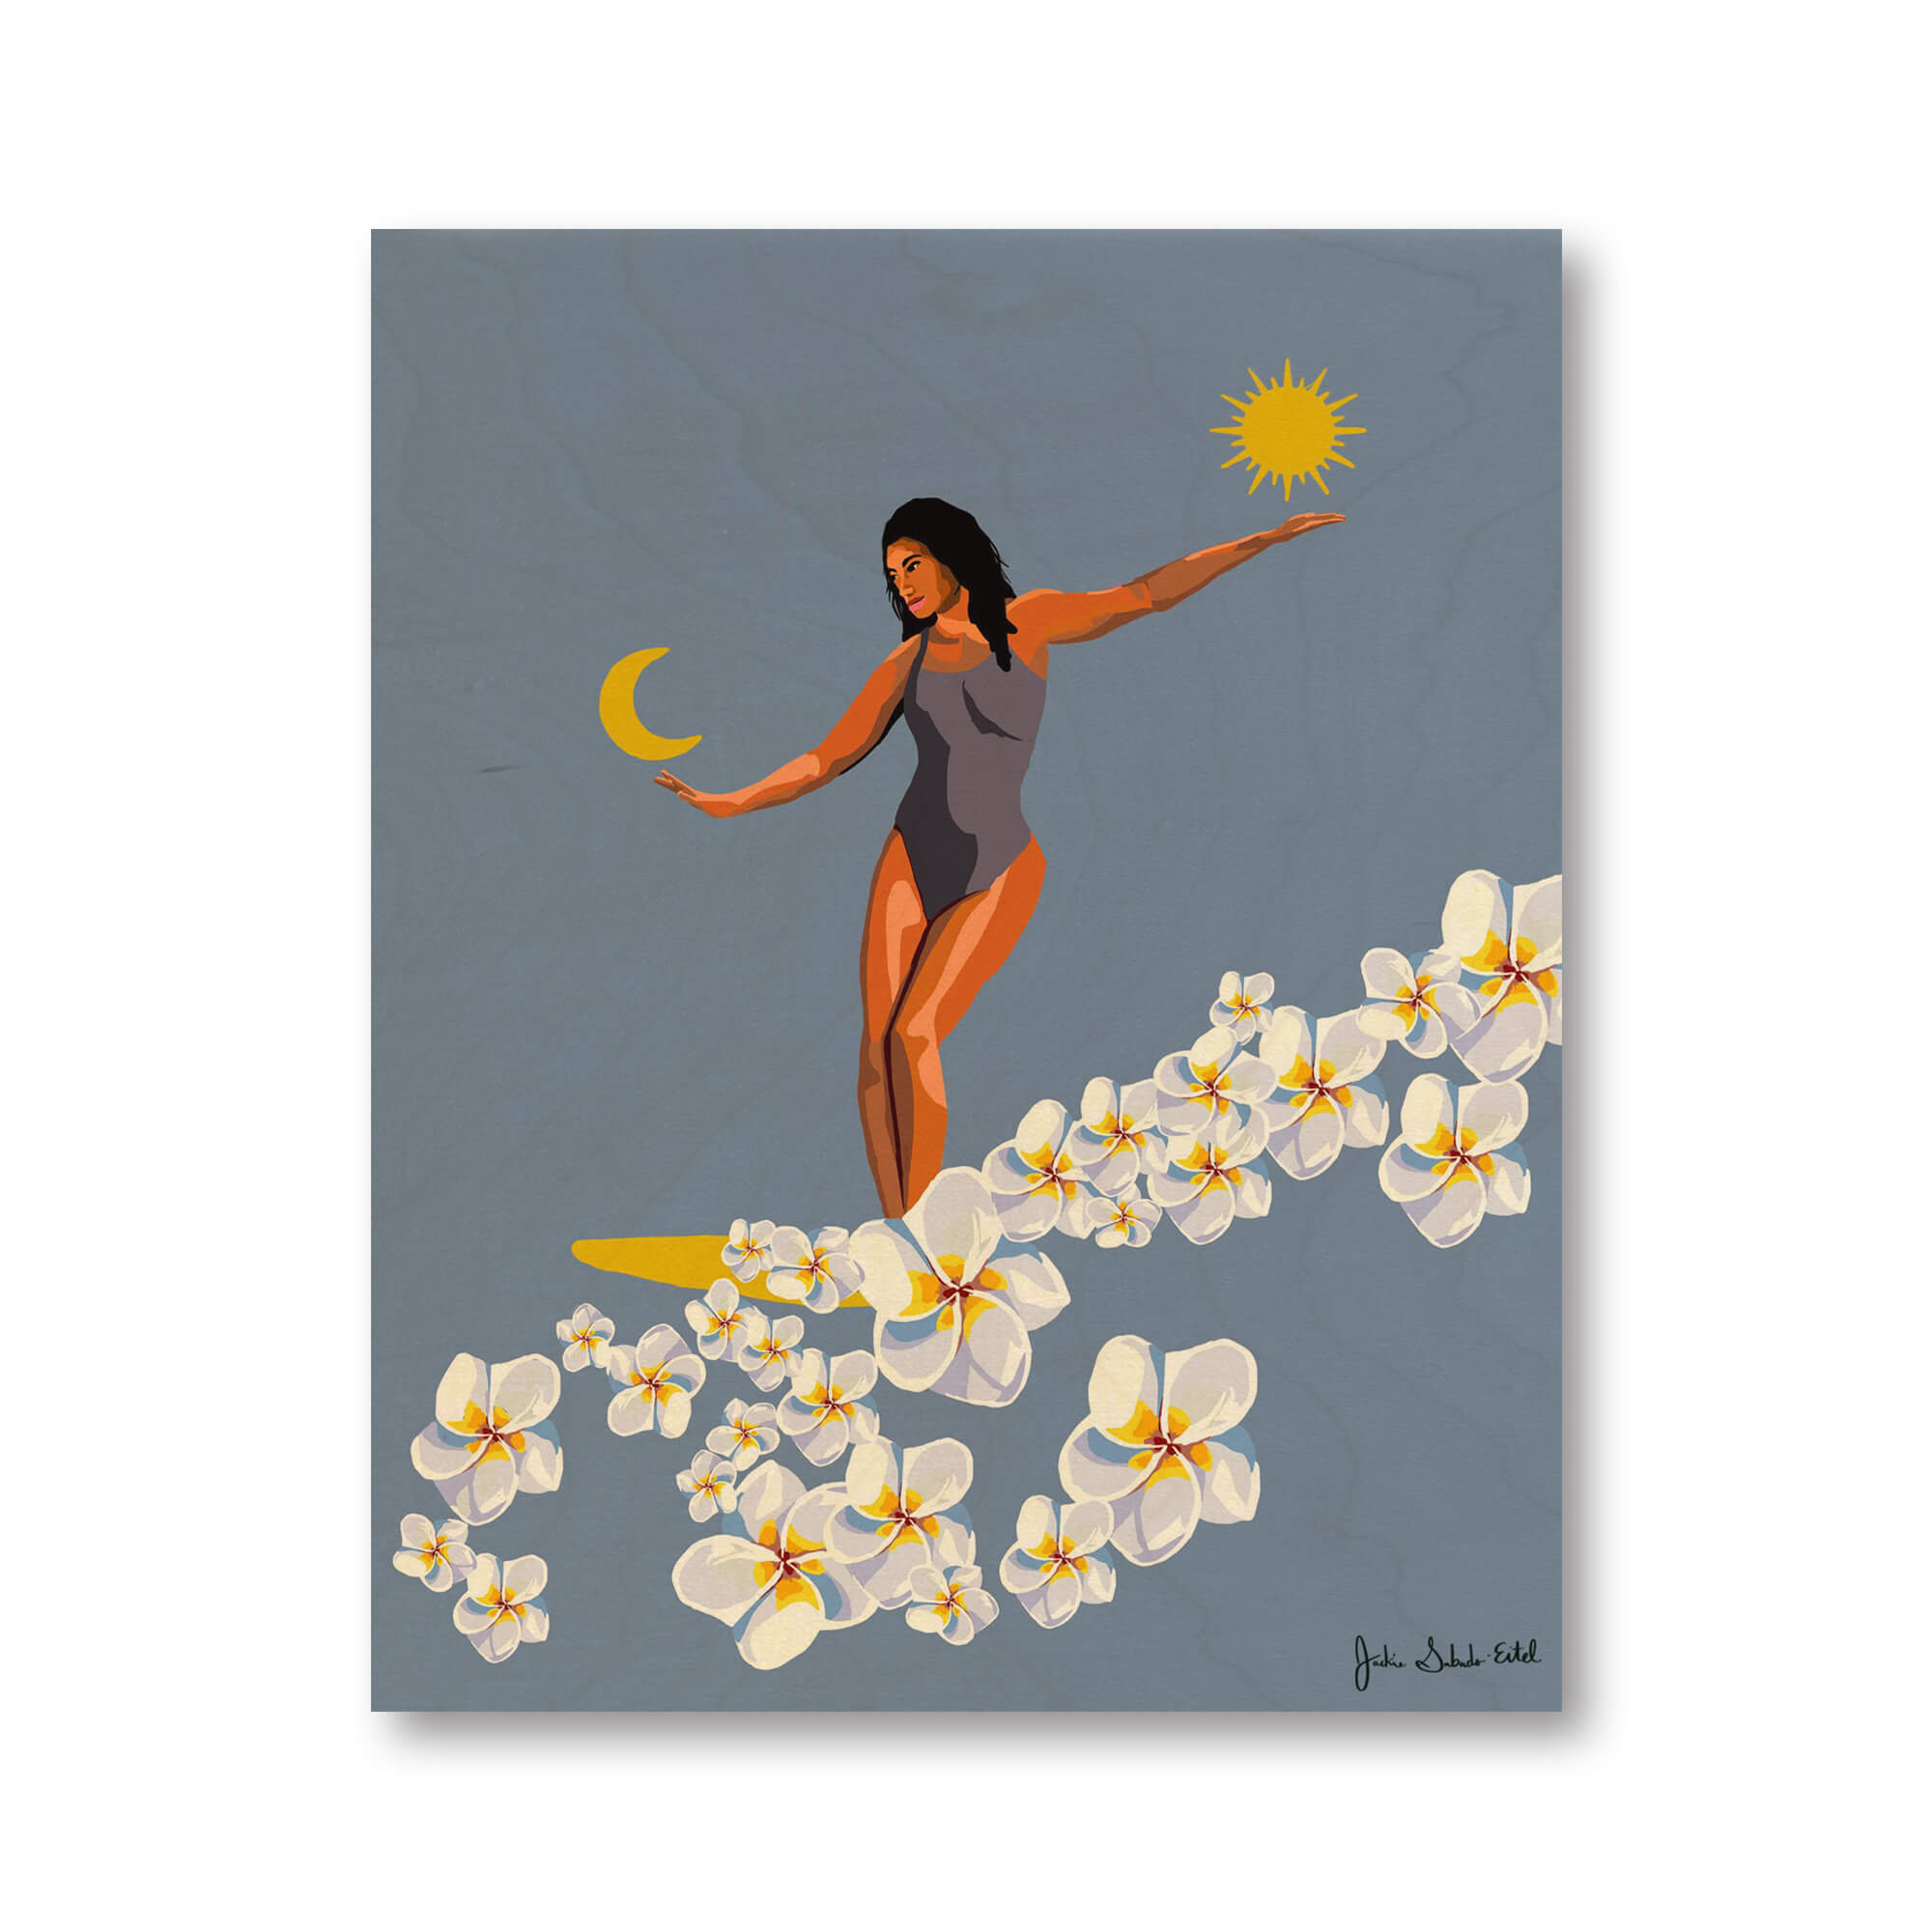 A wood art print of a woman surfing on plumeria flowers with the sun and moon on the background by Hawaii artist Jackie Eitel